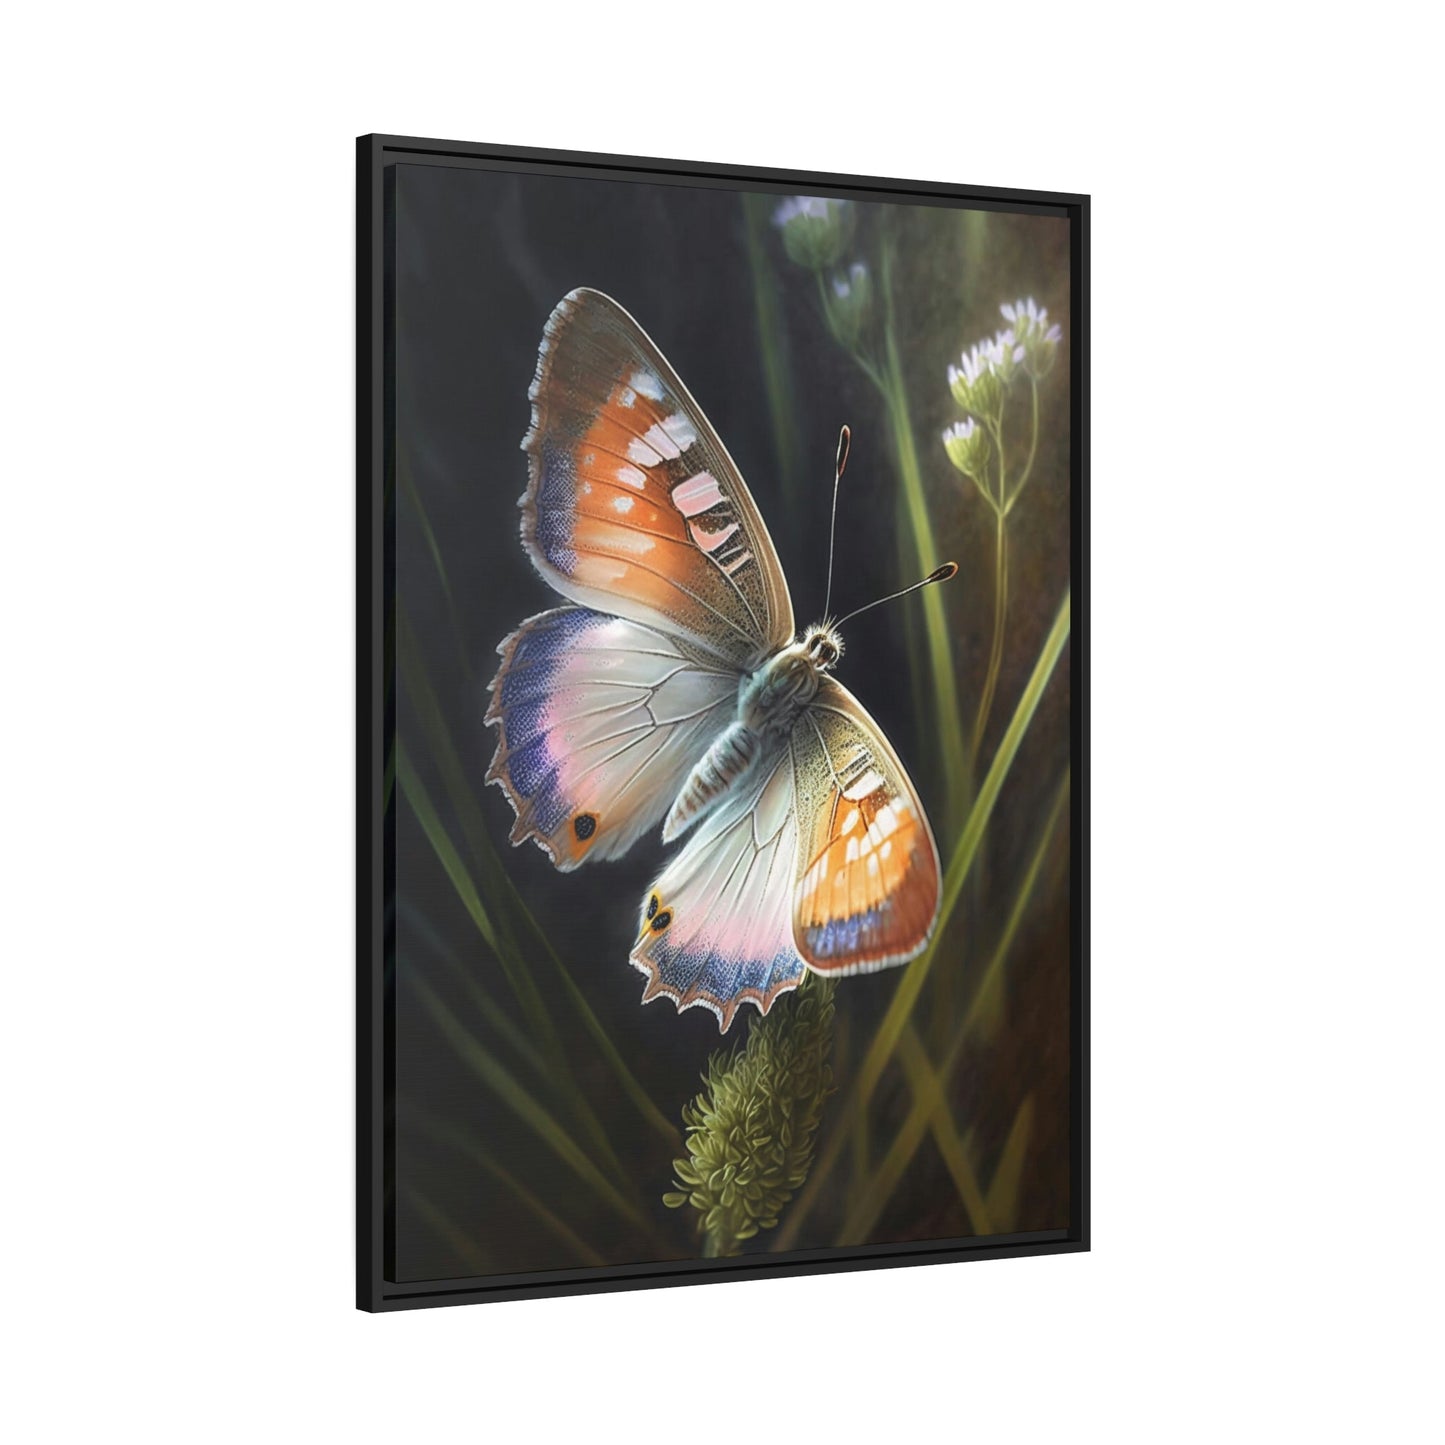 Butterfly's Solitude: Framed Poster & Canvas Print of One Insect in Tranquility